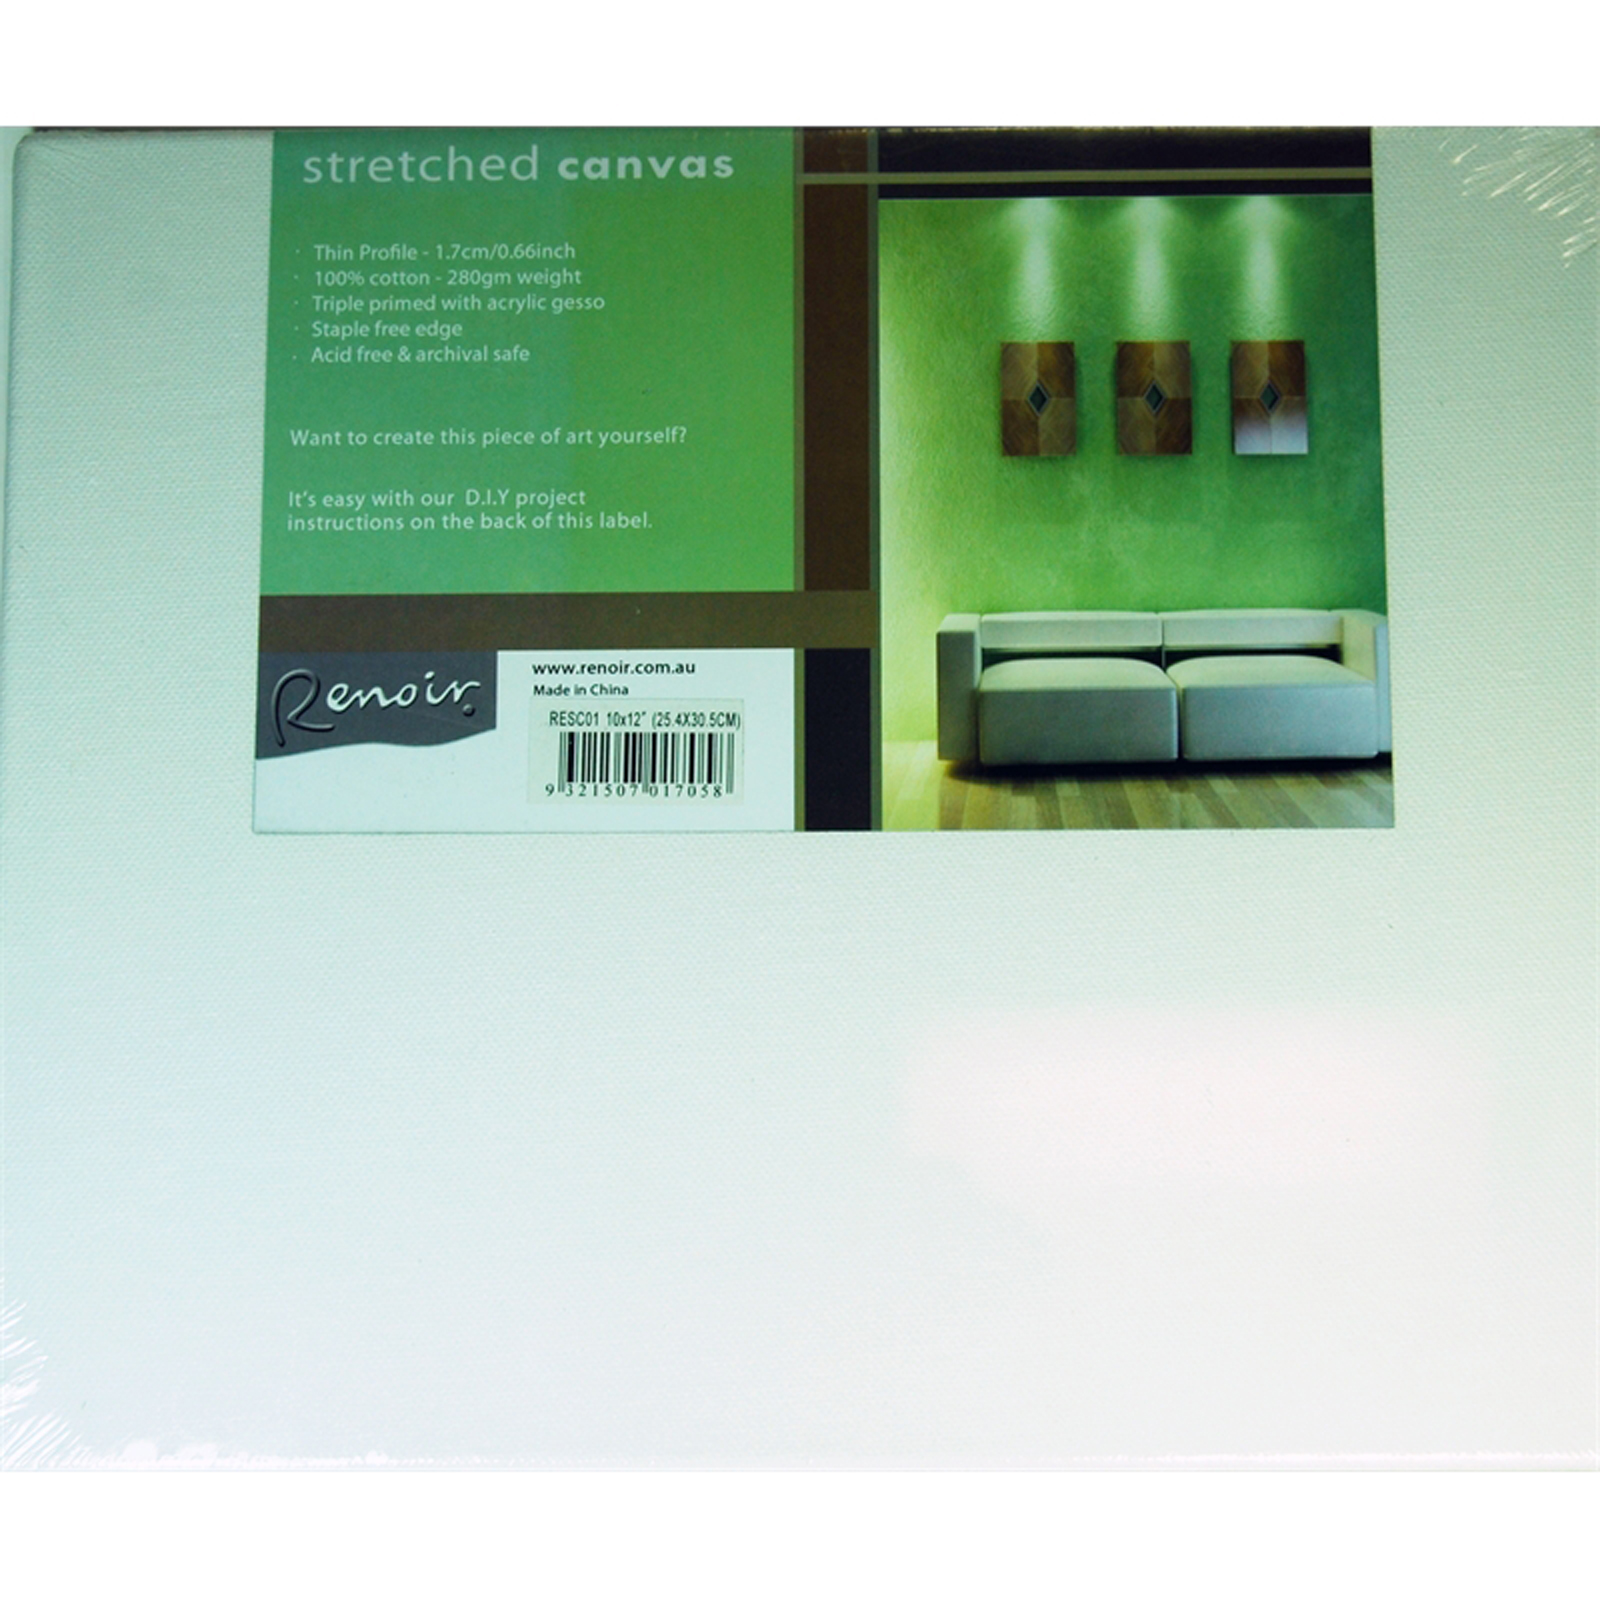 Renoir Stretched Canvas  - 254mm x 305mm